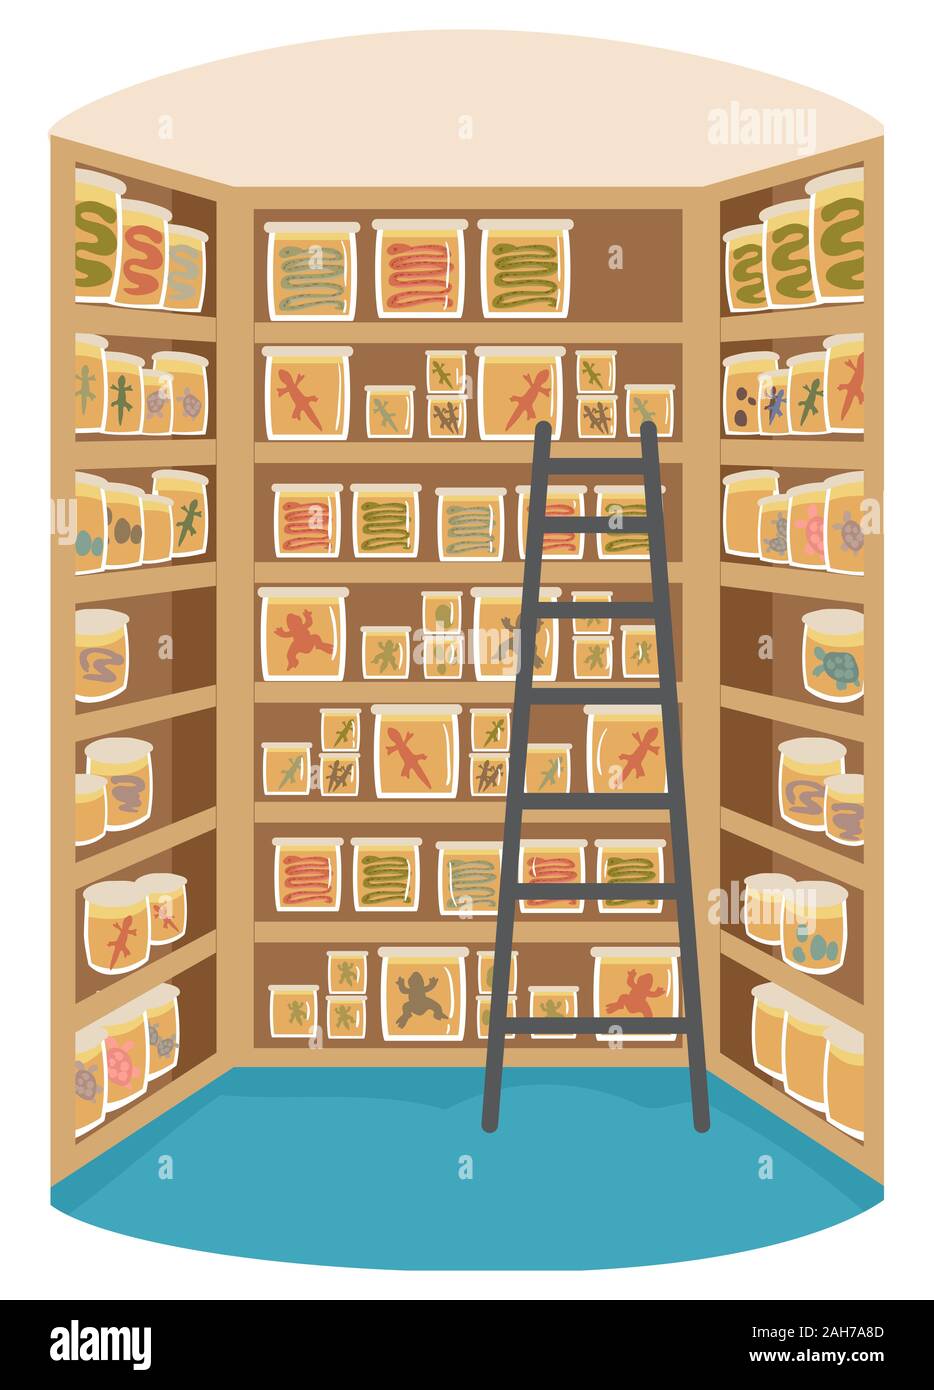 Illustration of a Herpetology Lab with a Ladder and Shelves Full of Jars and Specimen Stock Photo